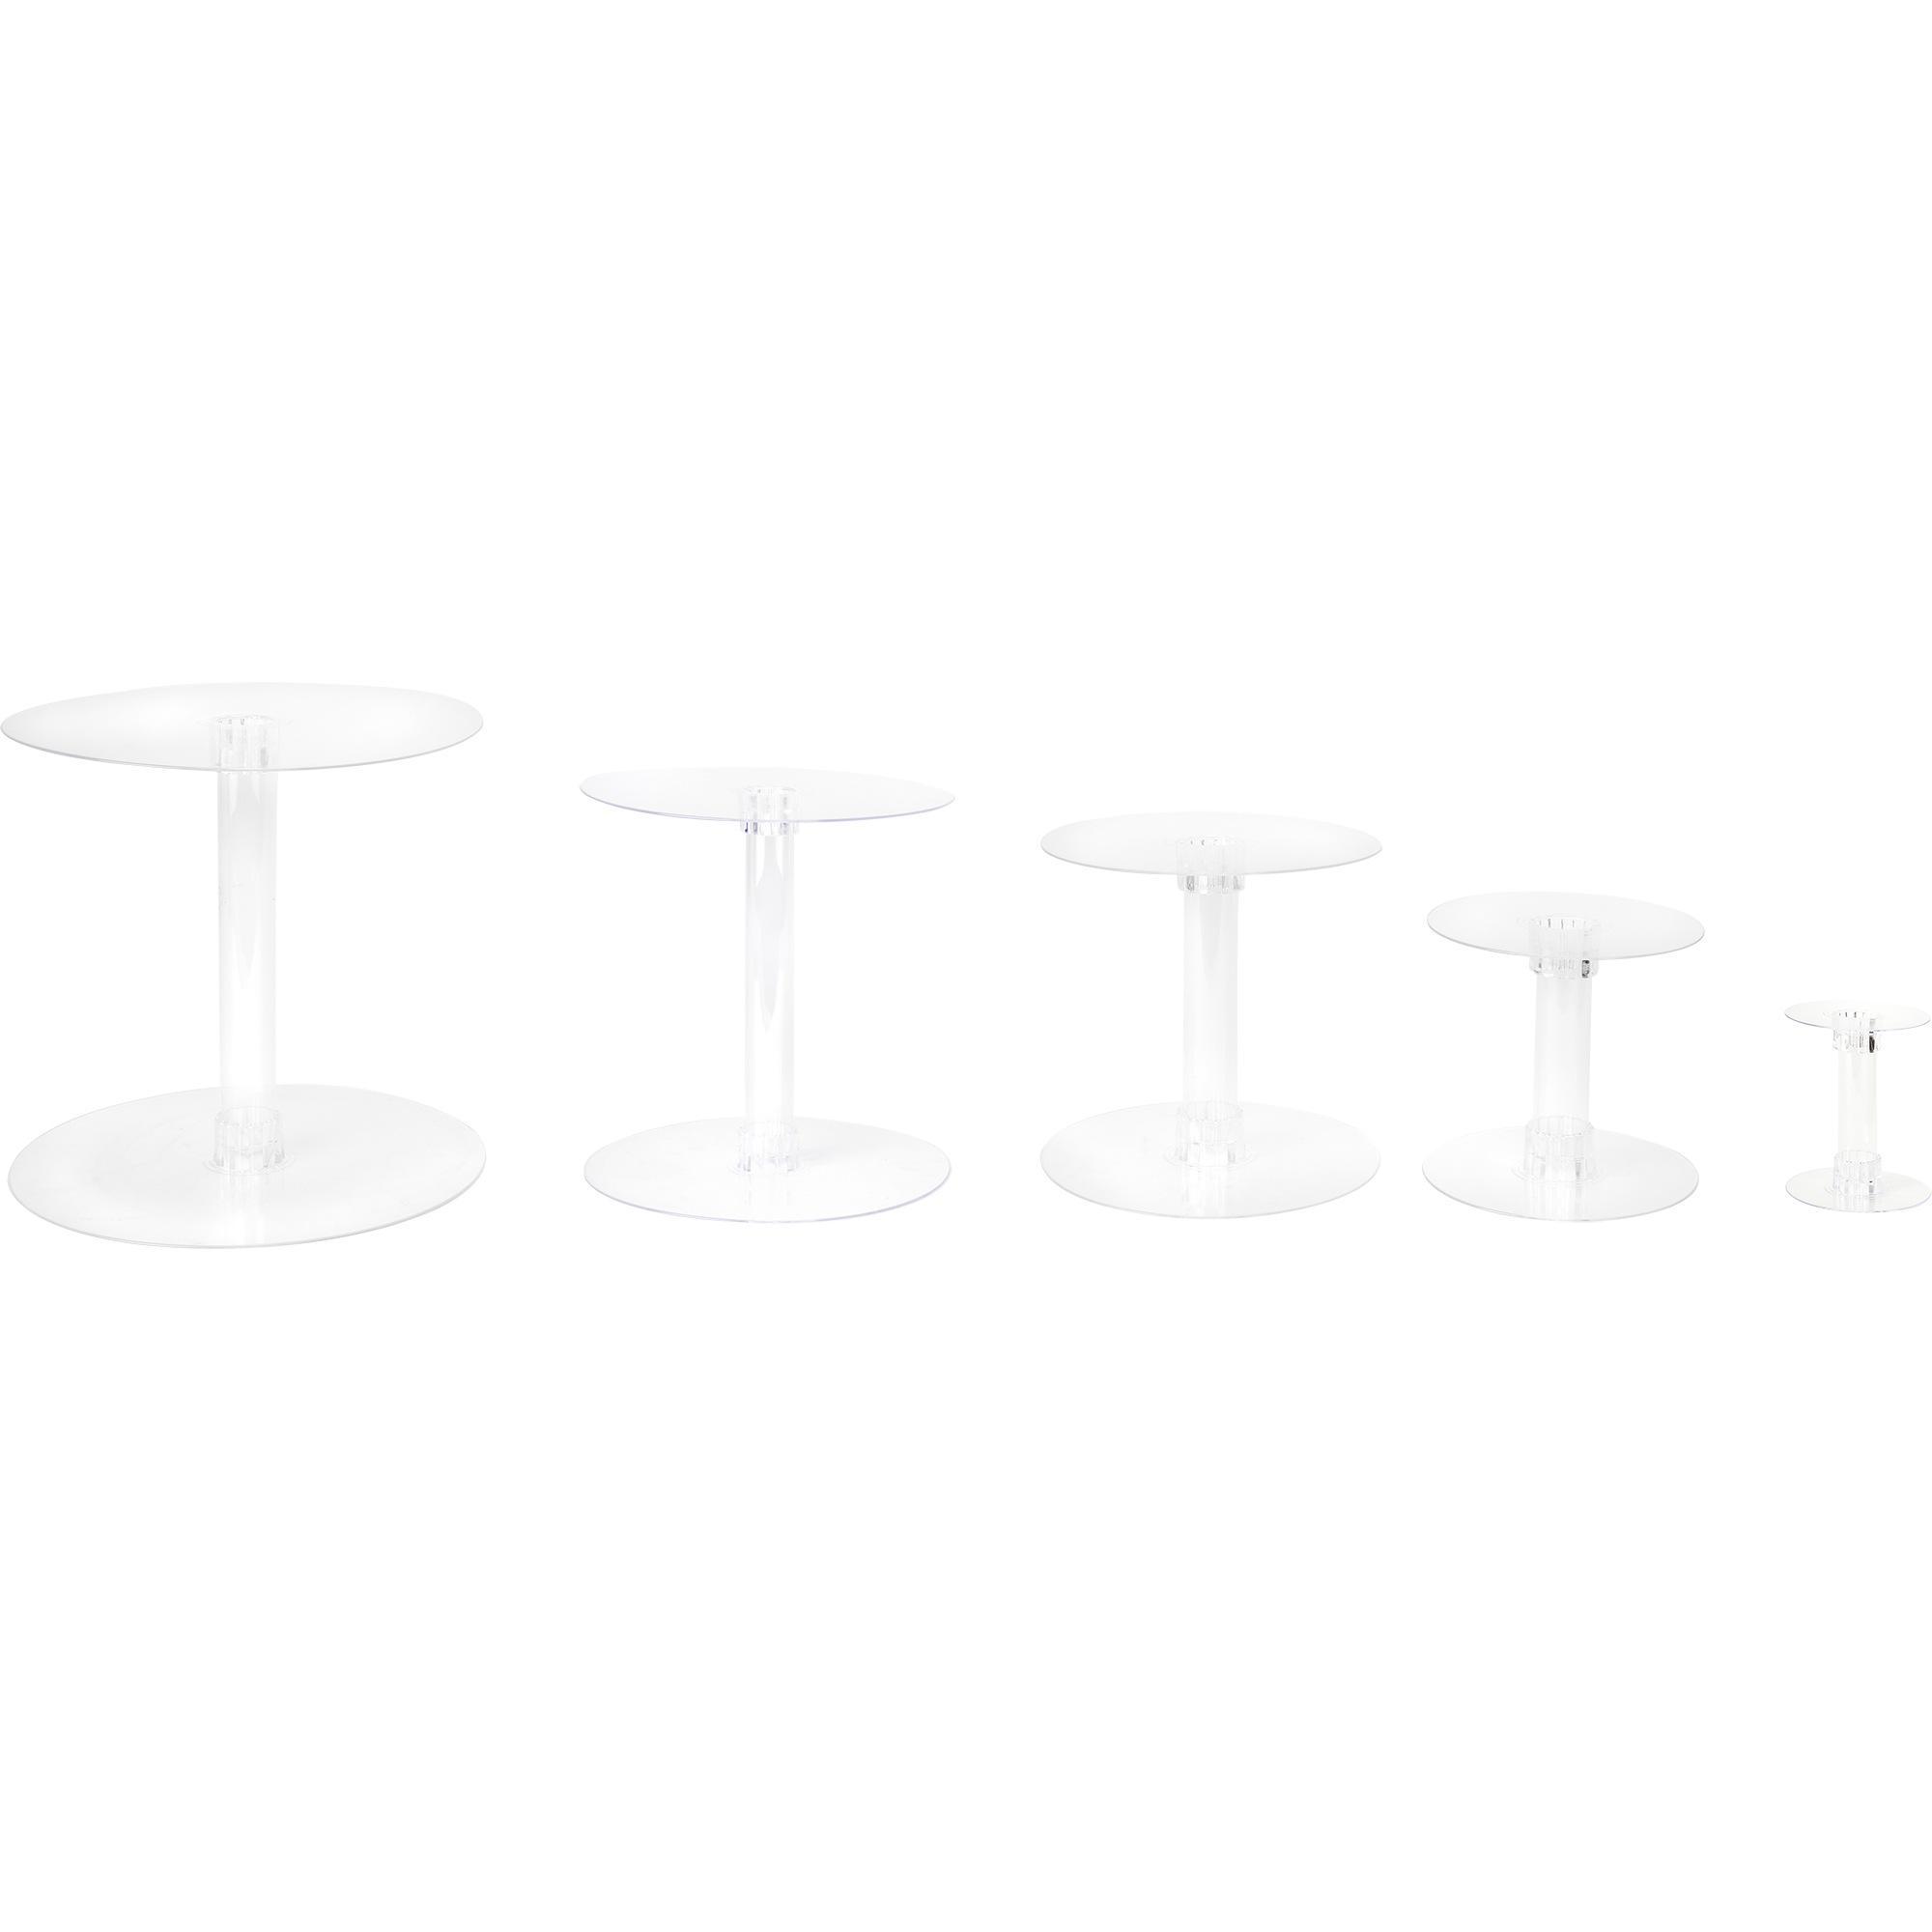 Plastic Plate Cake Stands 5pc/set